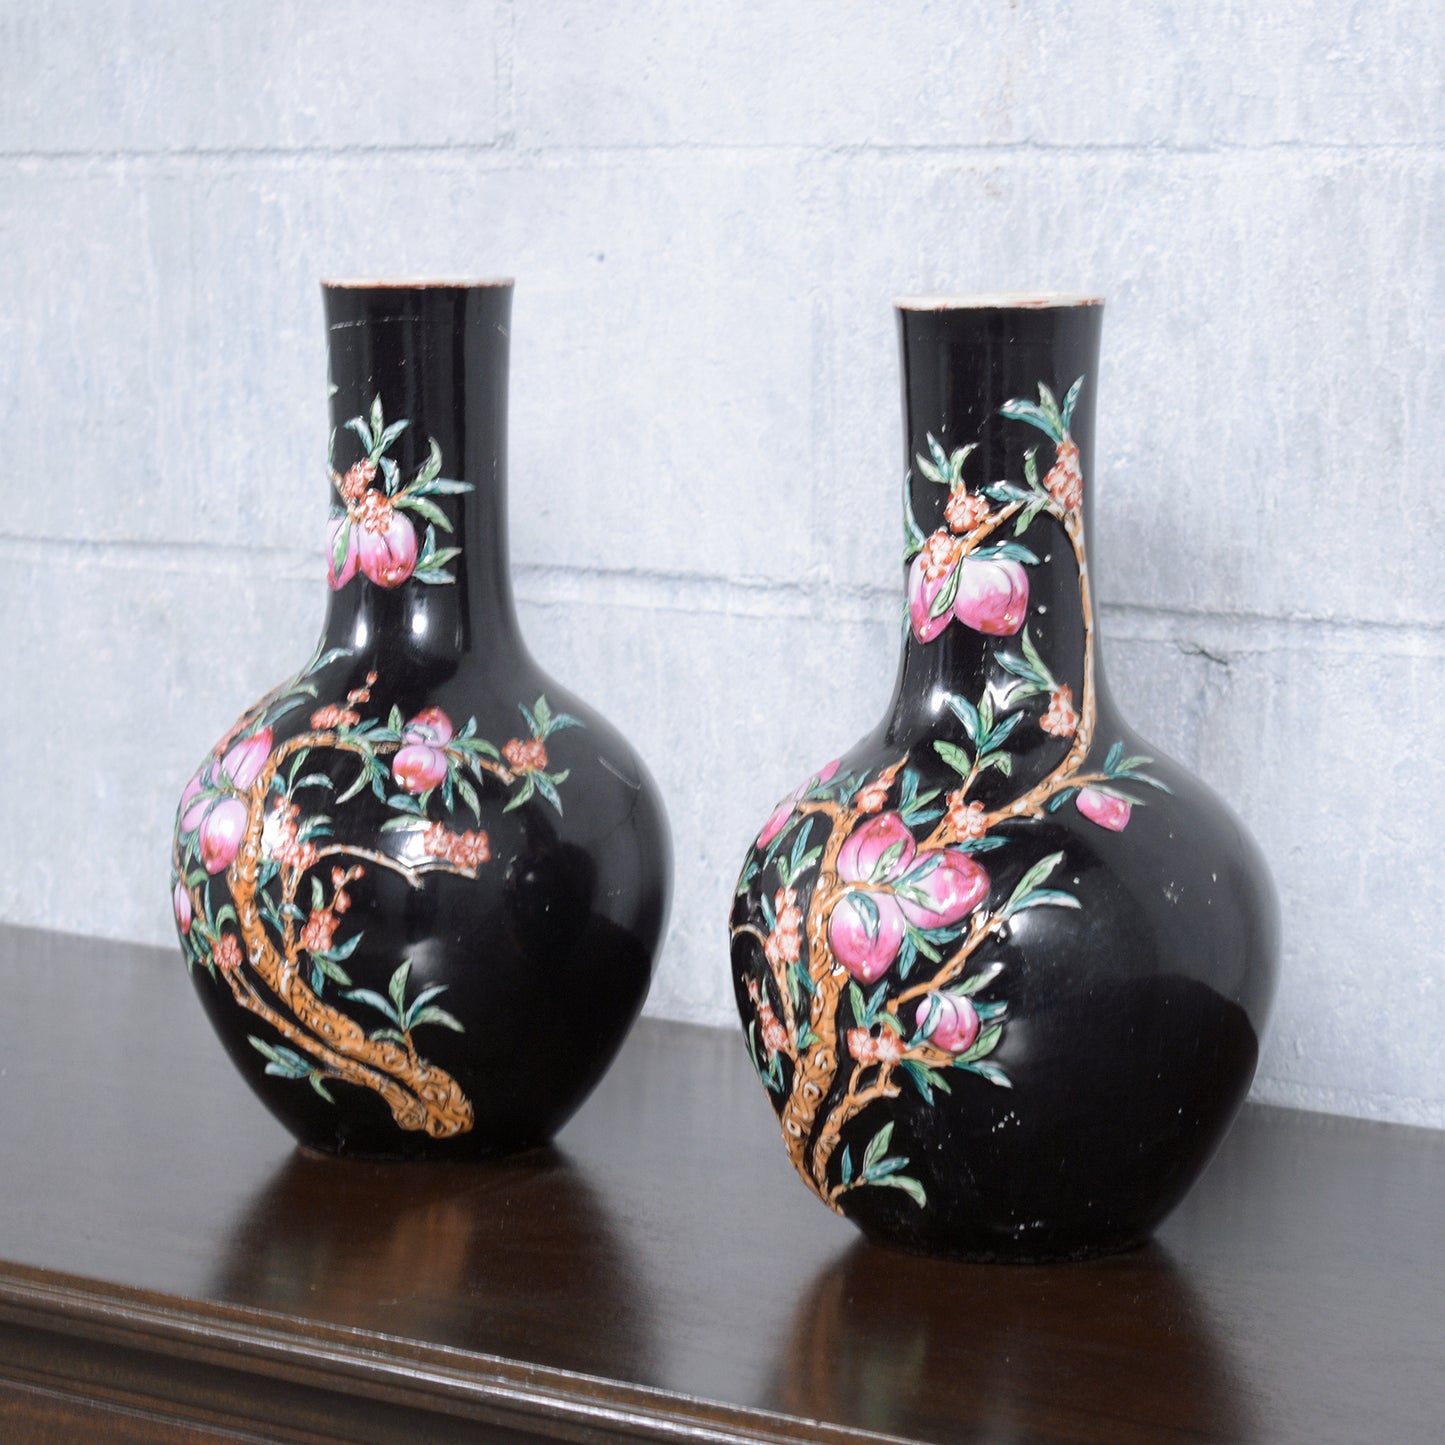 Pair of Vintage Hand-Painted Chinese Porcelain Vases with Floral & Fruit Pattern